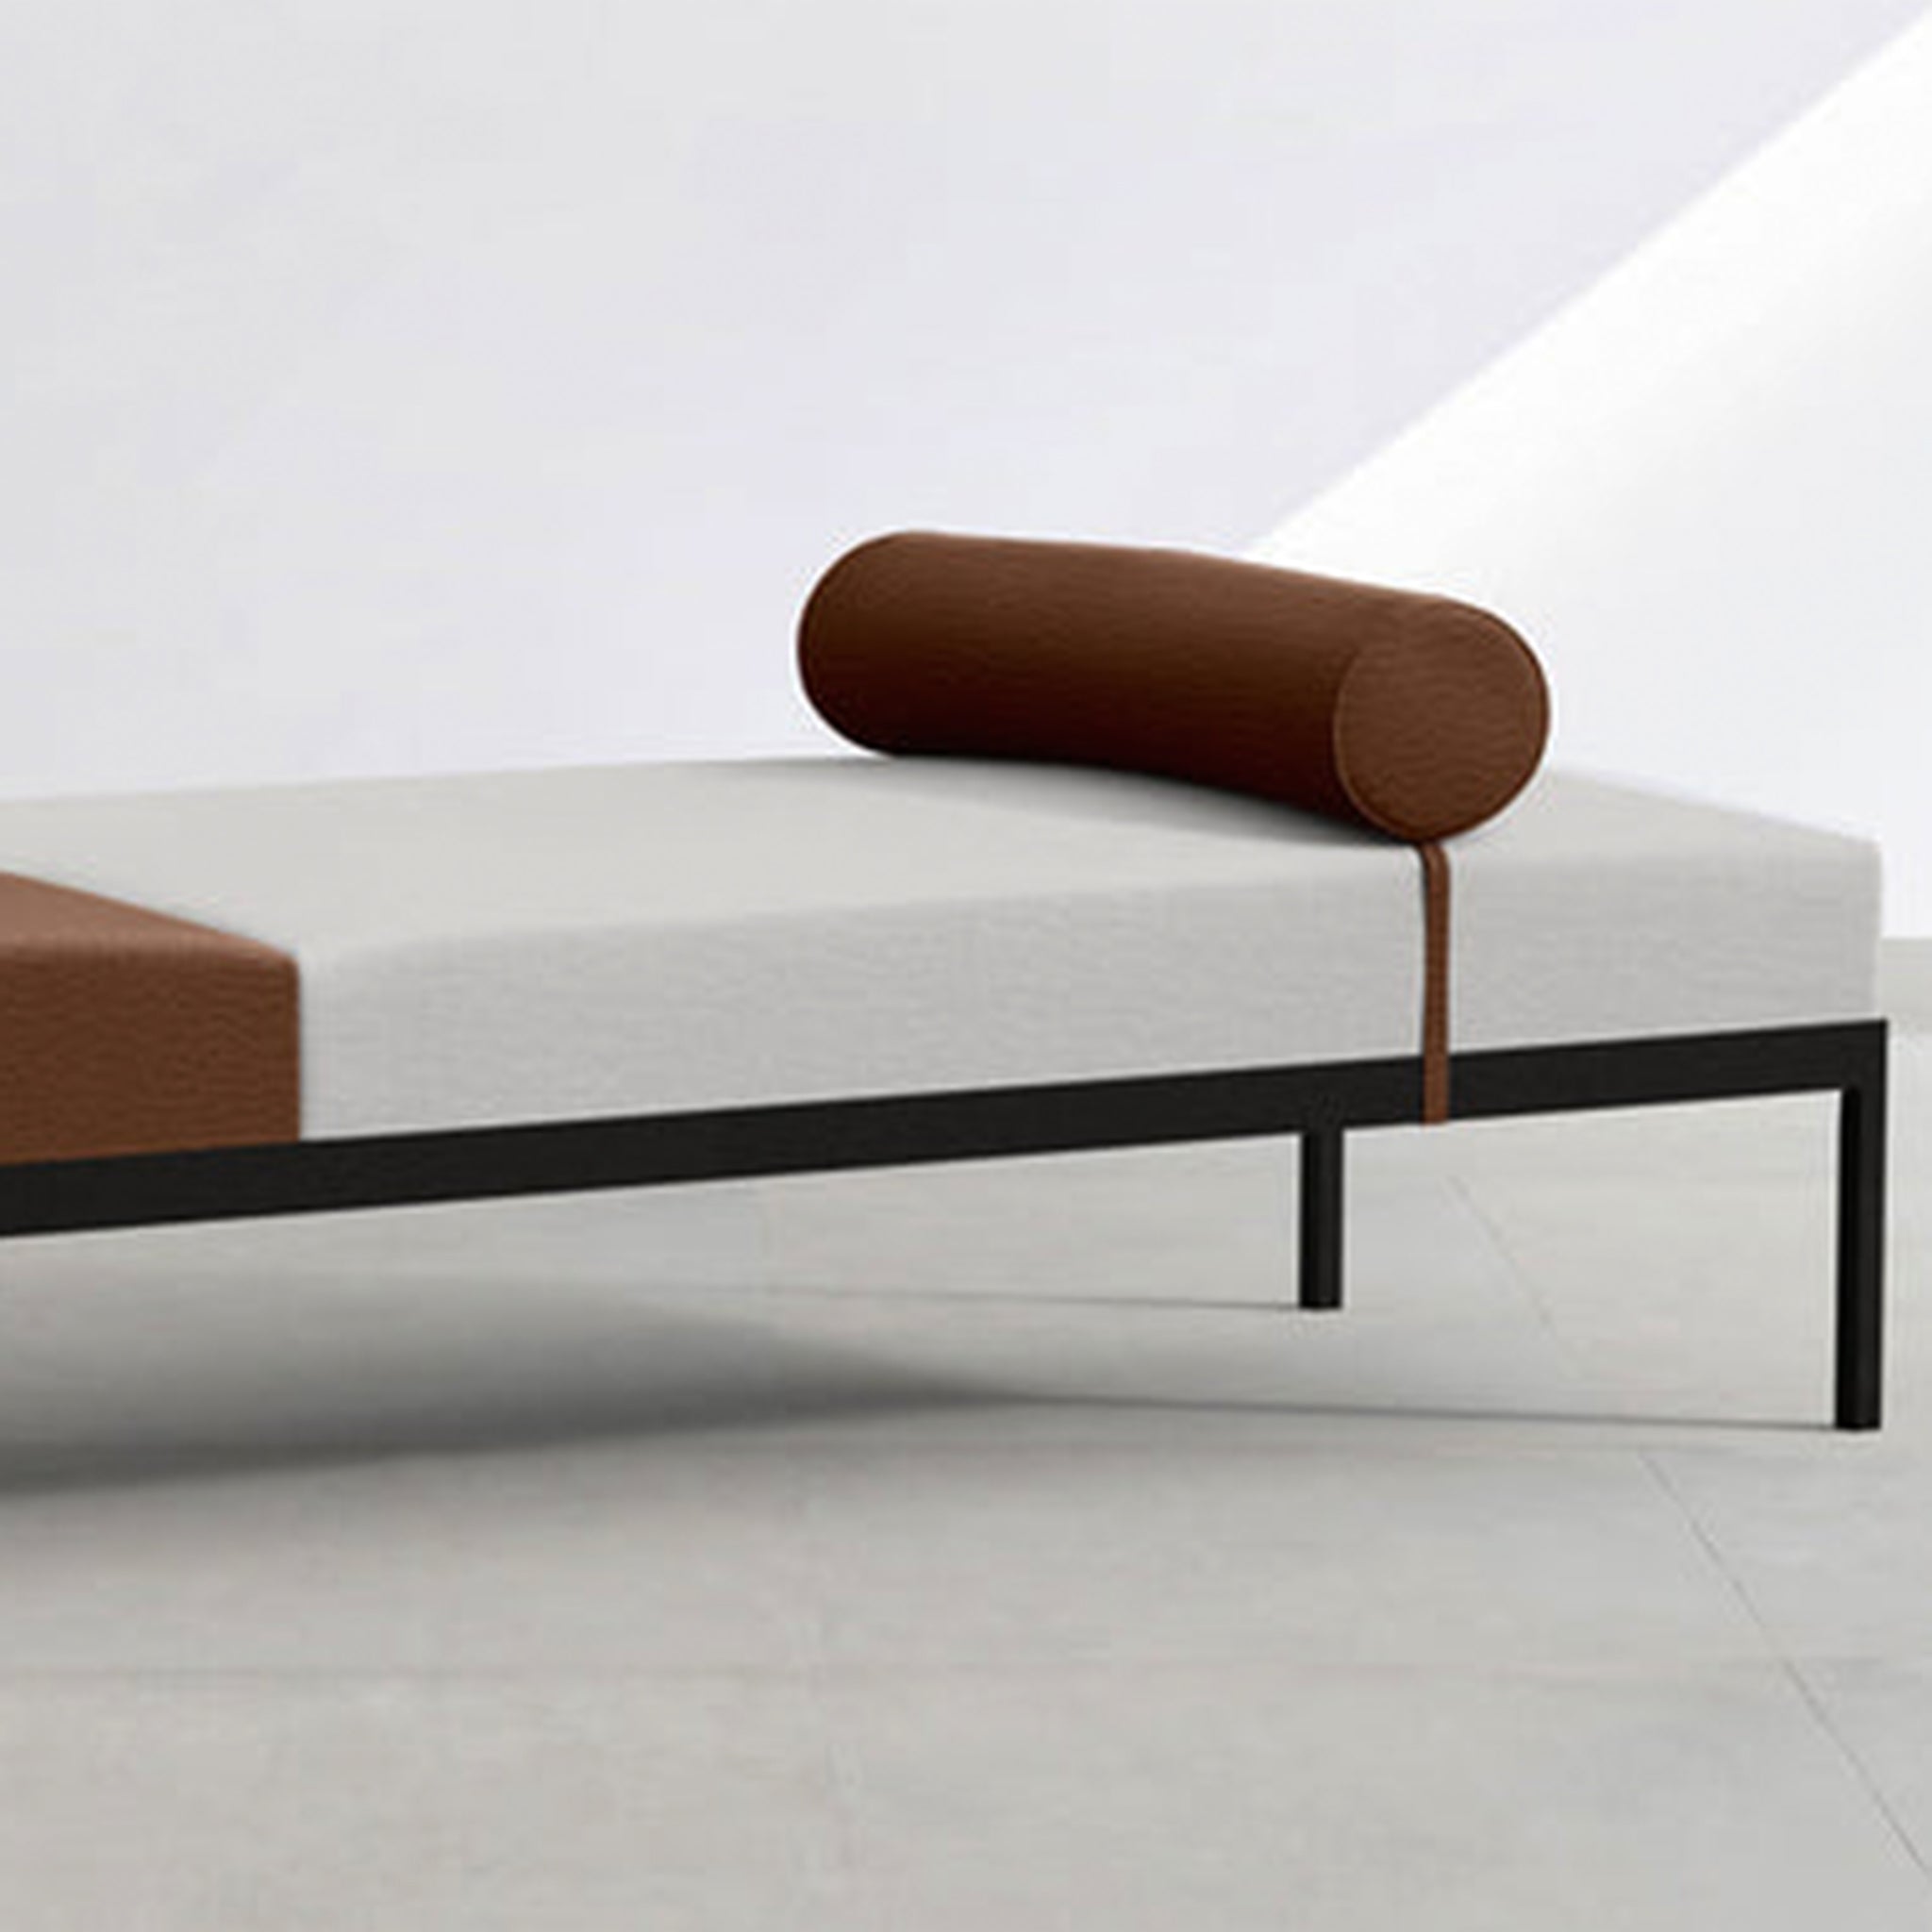 Two-tone upholstered Rodman Day Bed with bolster cushion.